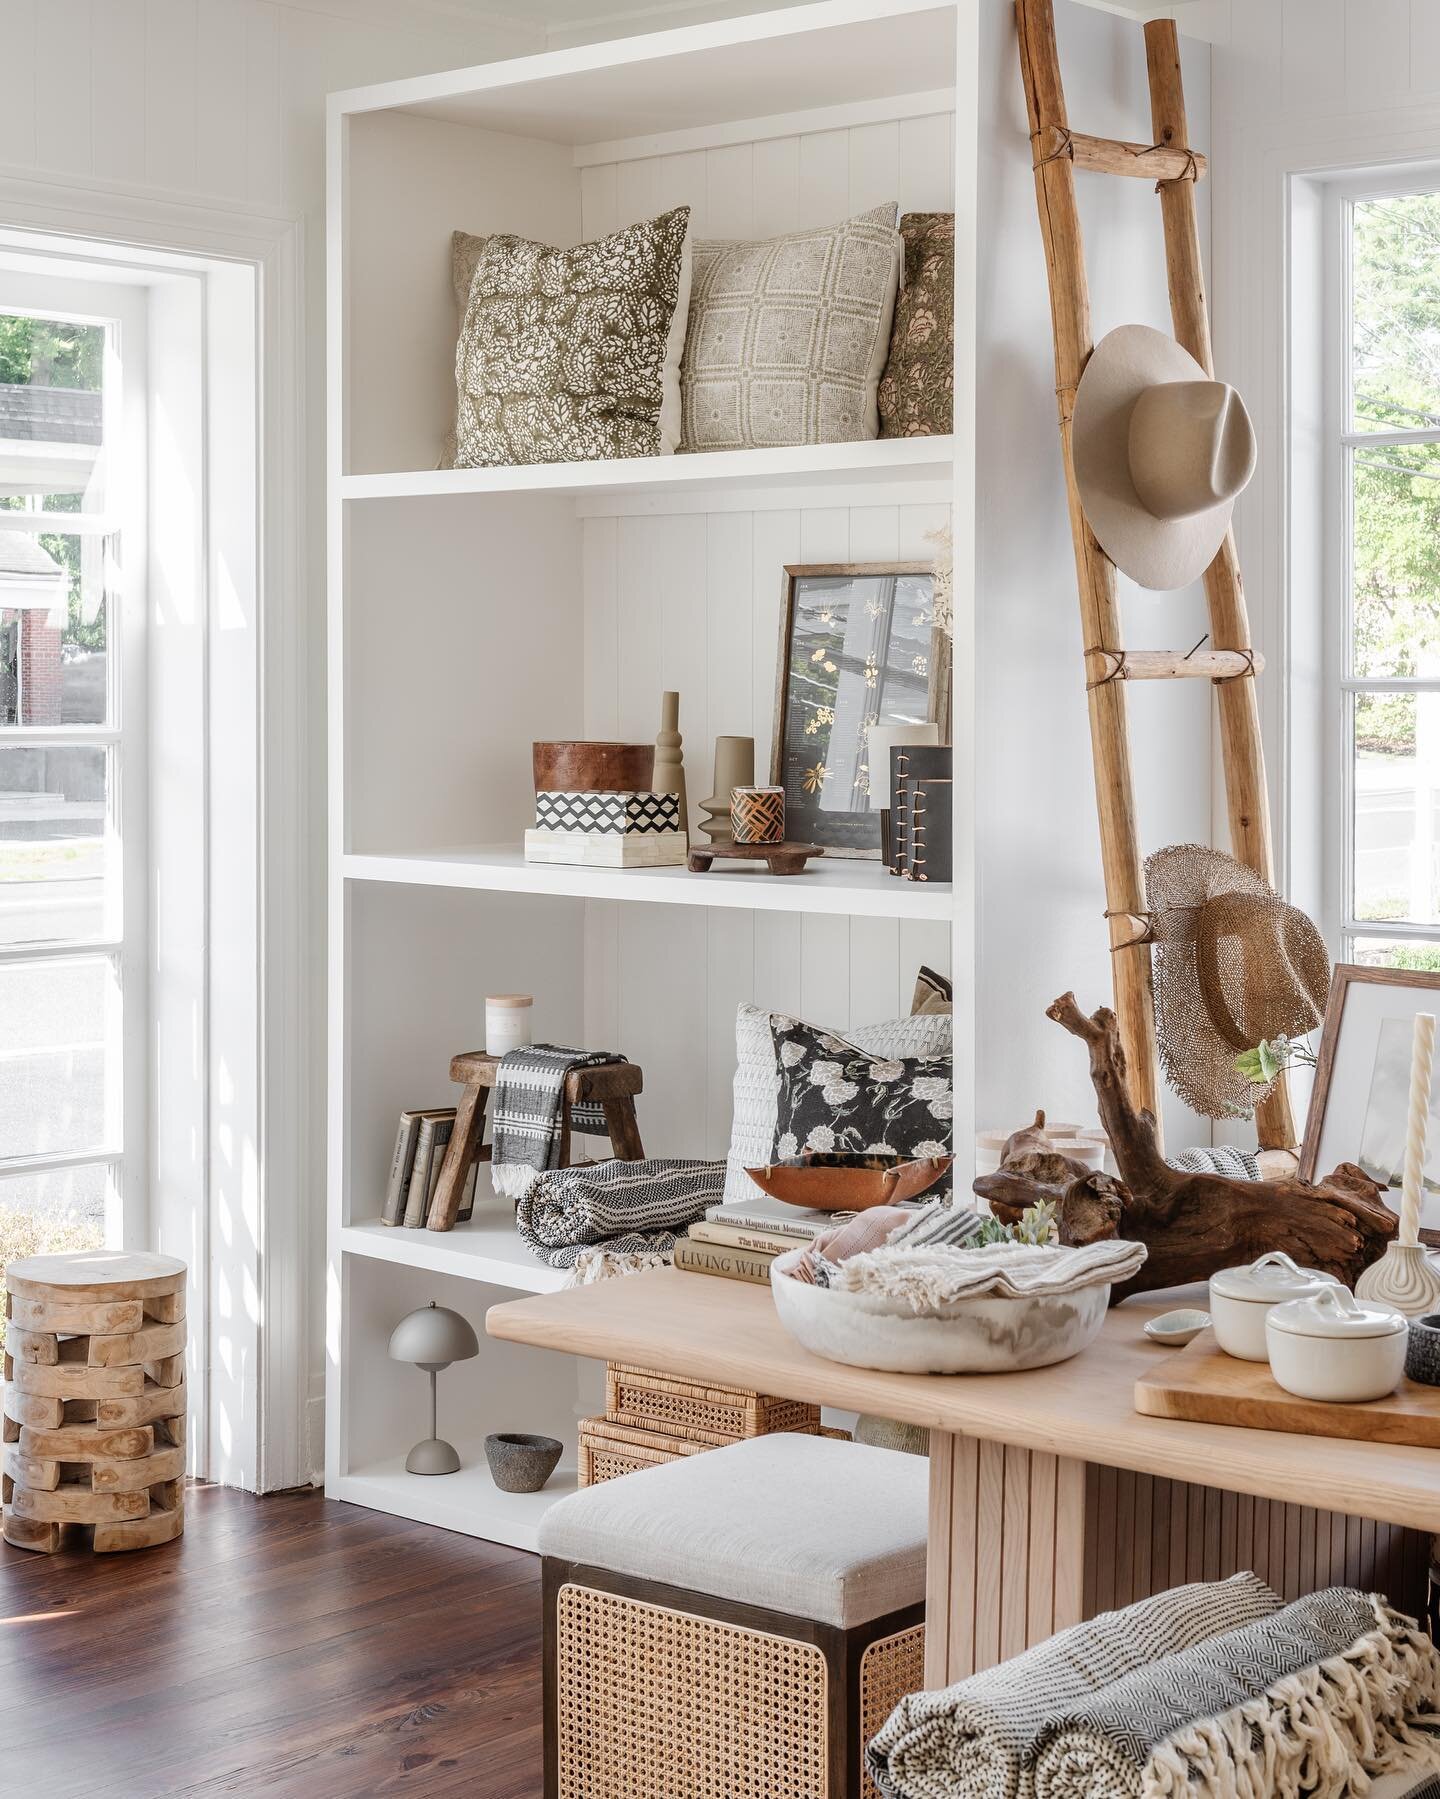 SAVE THE DATE for our next Proppe Shoppe POP UP! Saturday April 1st at Collected Living Co. in Chatham, NJ. We are excited to layer their gorgeous collection of home furnishings and accessories with our vintage finds&hellip;and, in case you needed so